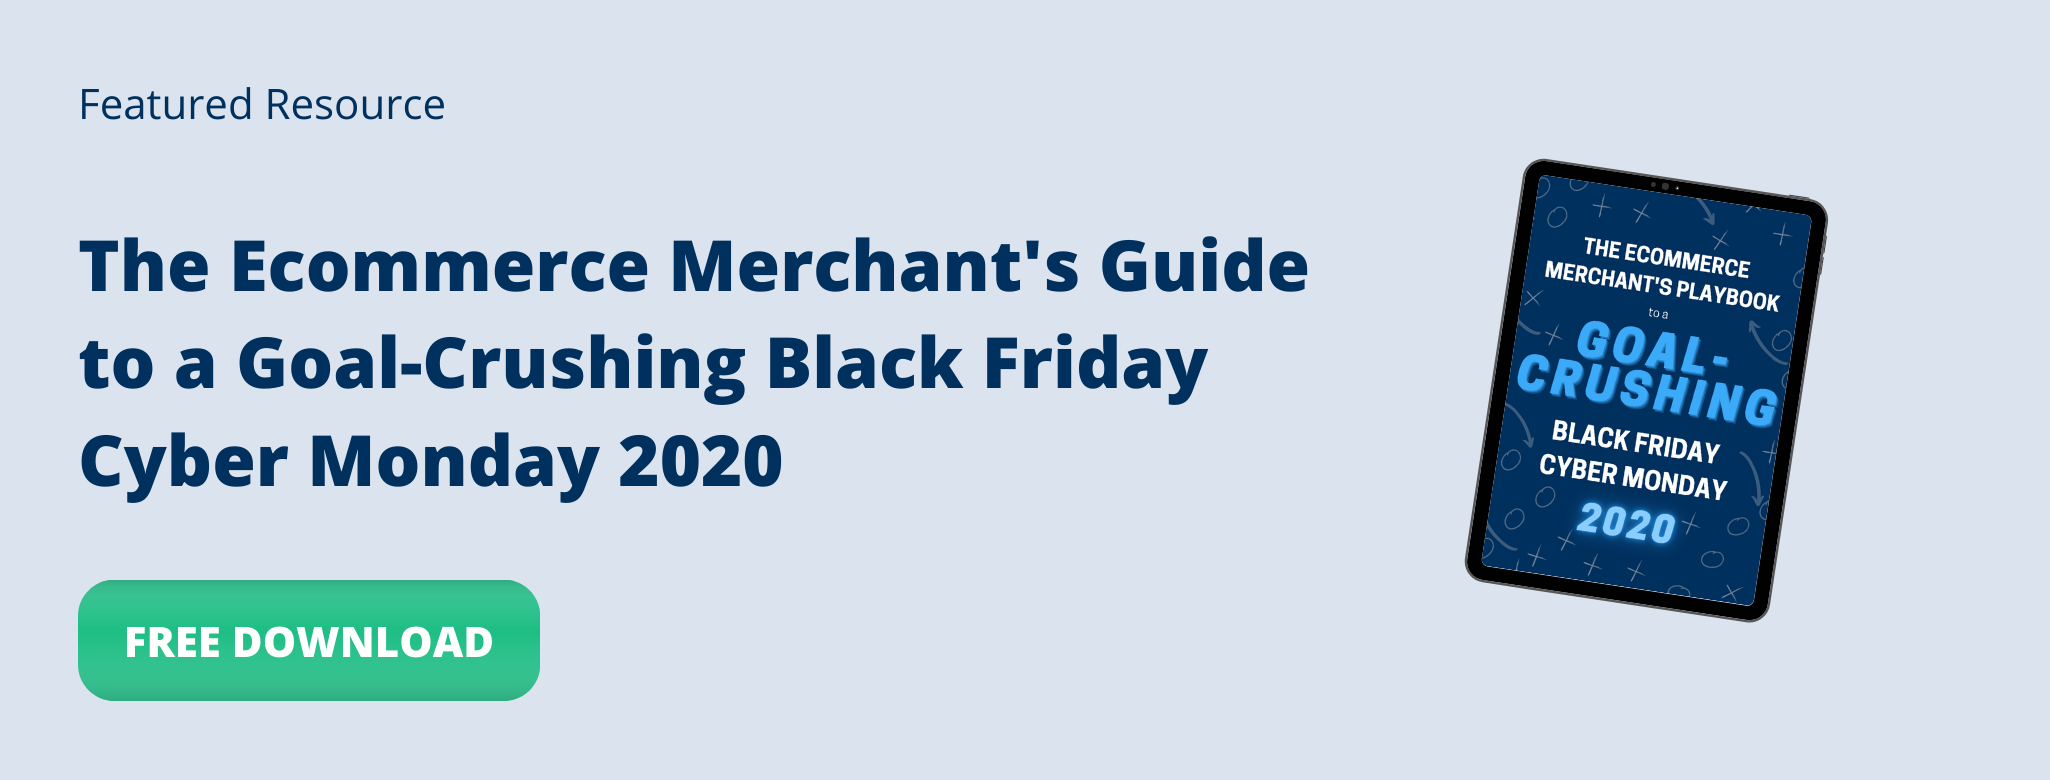 Download the Ecommerce Merchant's Guide to a Goal-Crushing Black Friday Cyber Monday